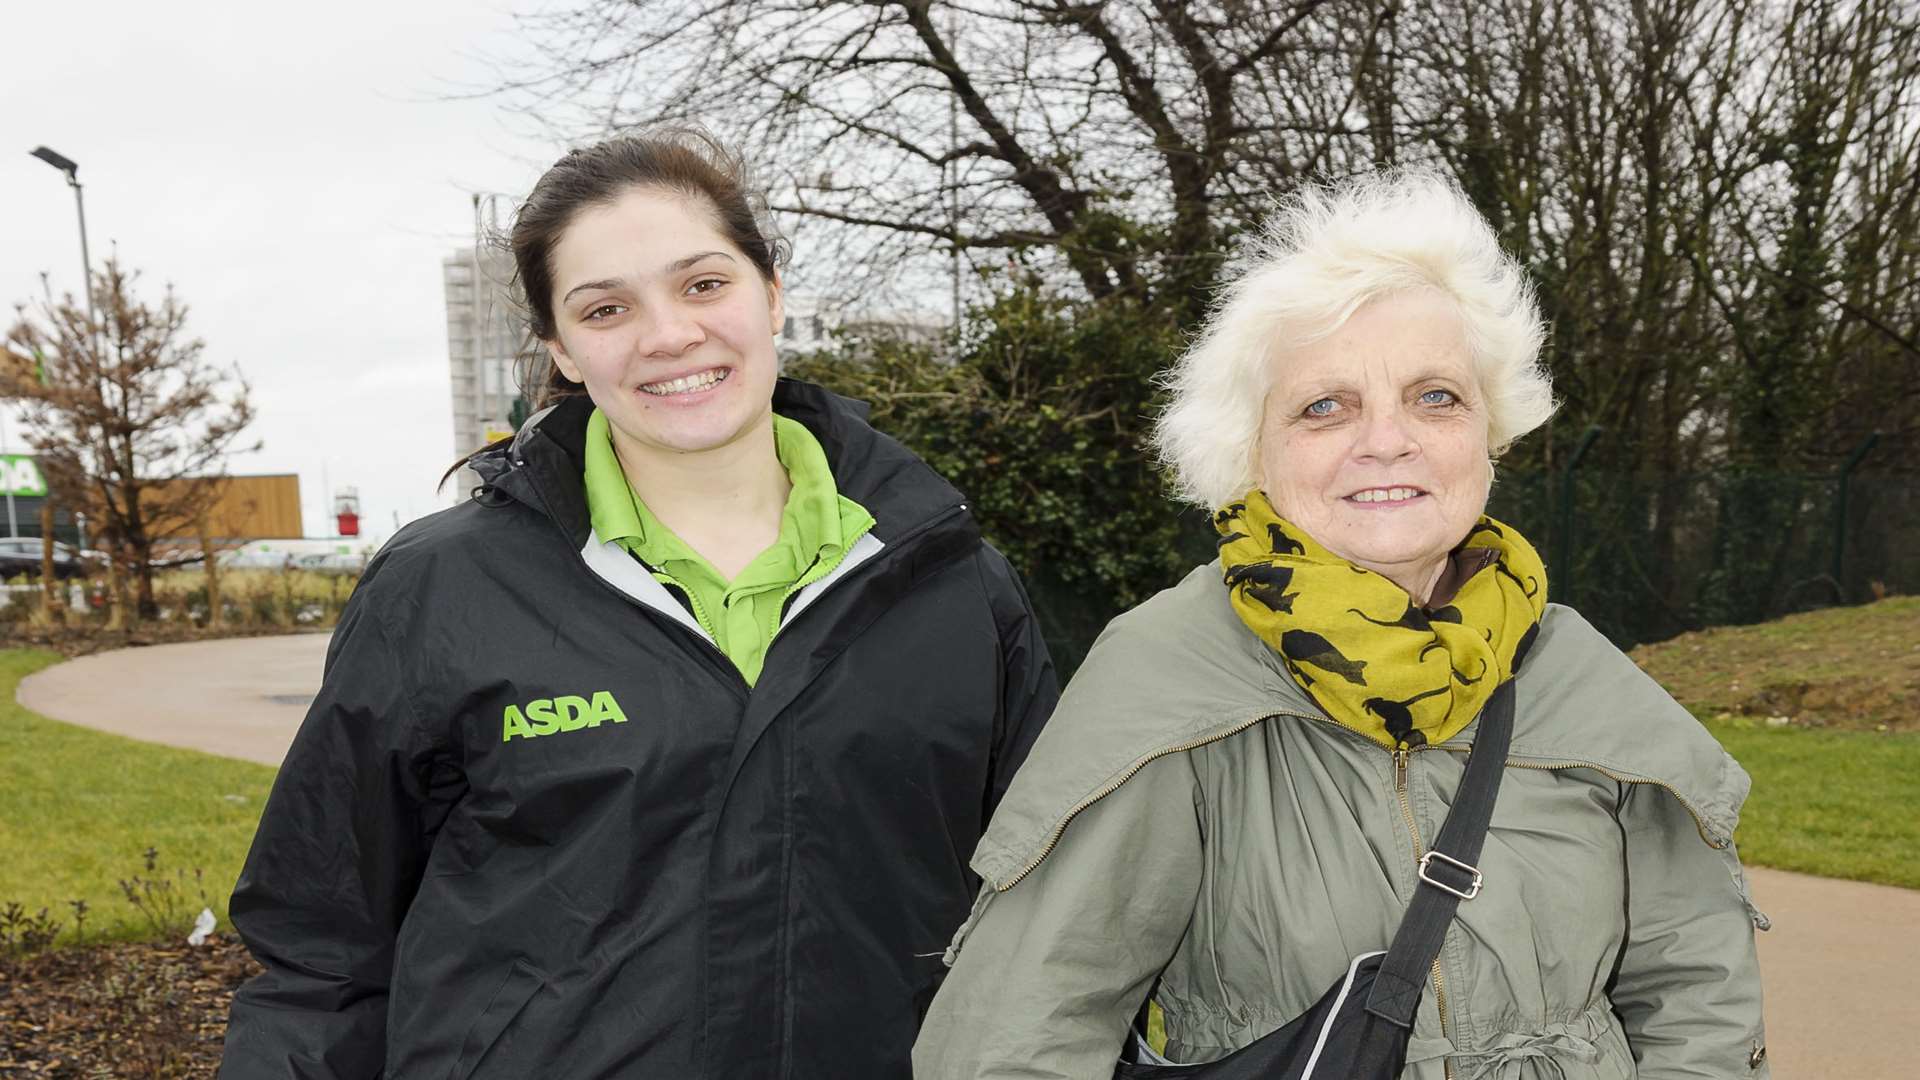 Rosie Smith from Asda, and Cllr Pat Cooper.